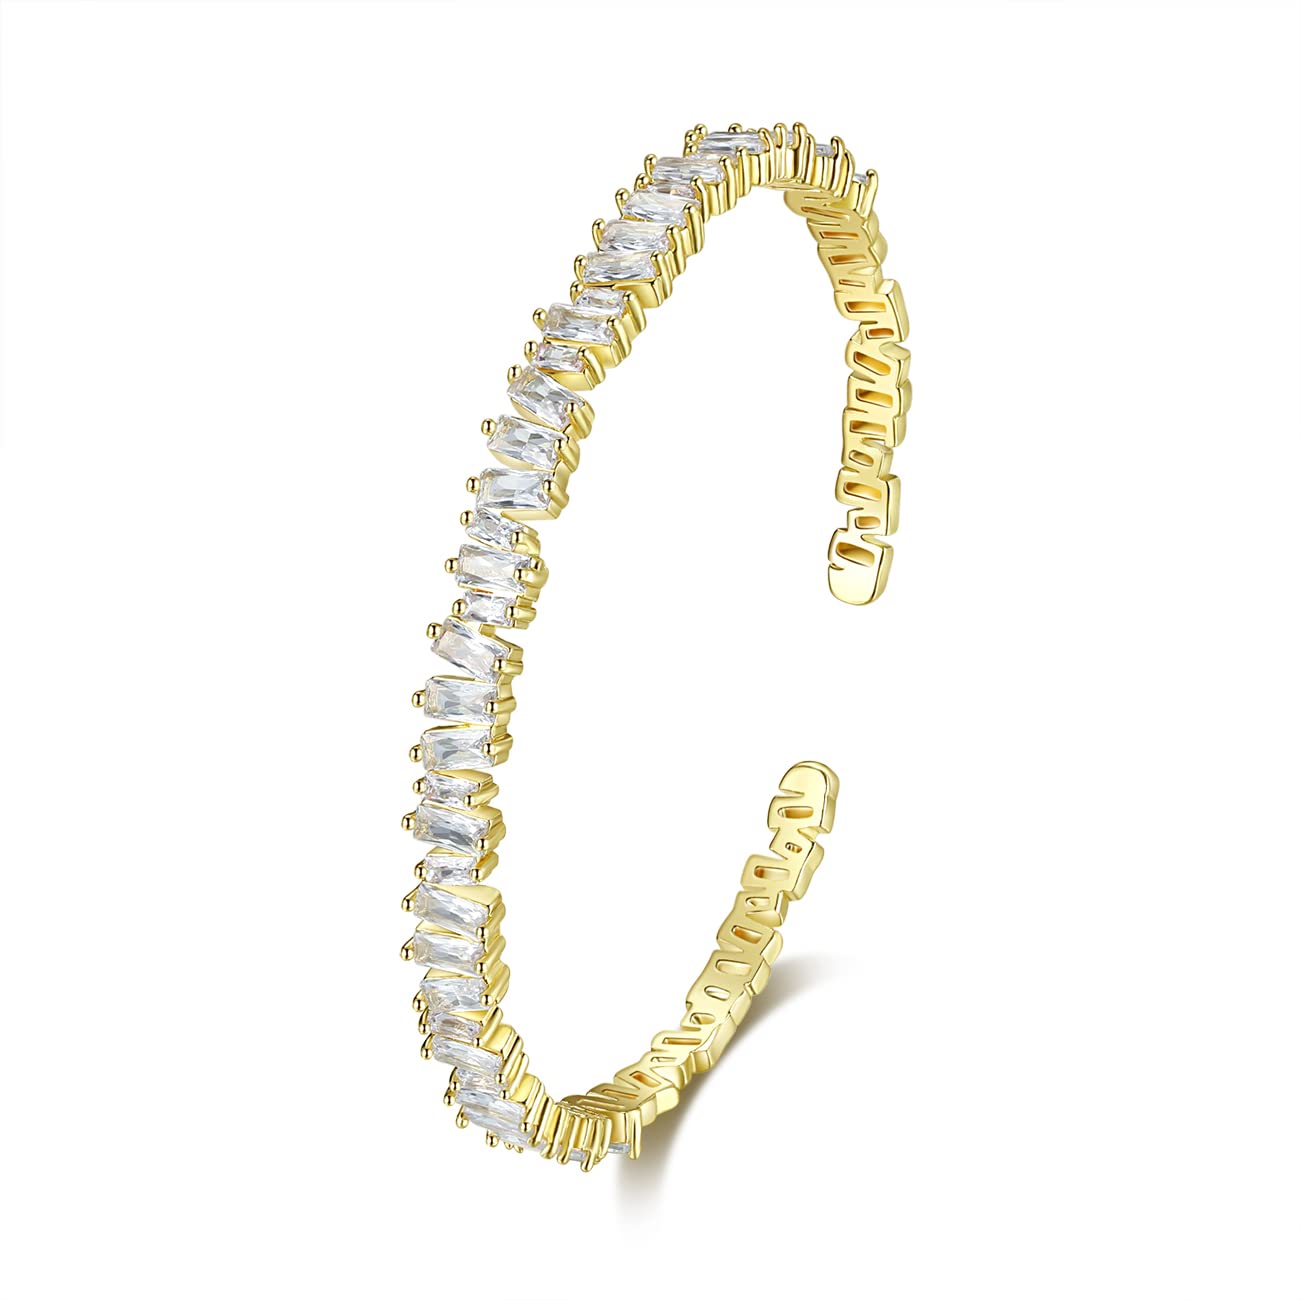 Gorgeous Gold Geometric Bracelet with Zircon - Perfect for Weddings & Engagements!